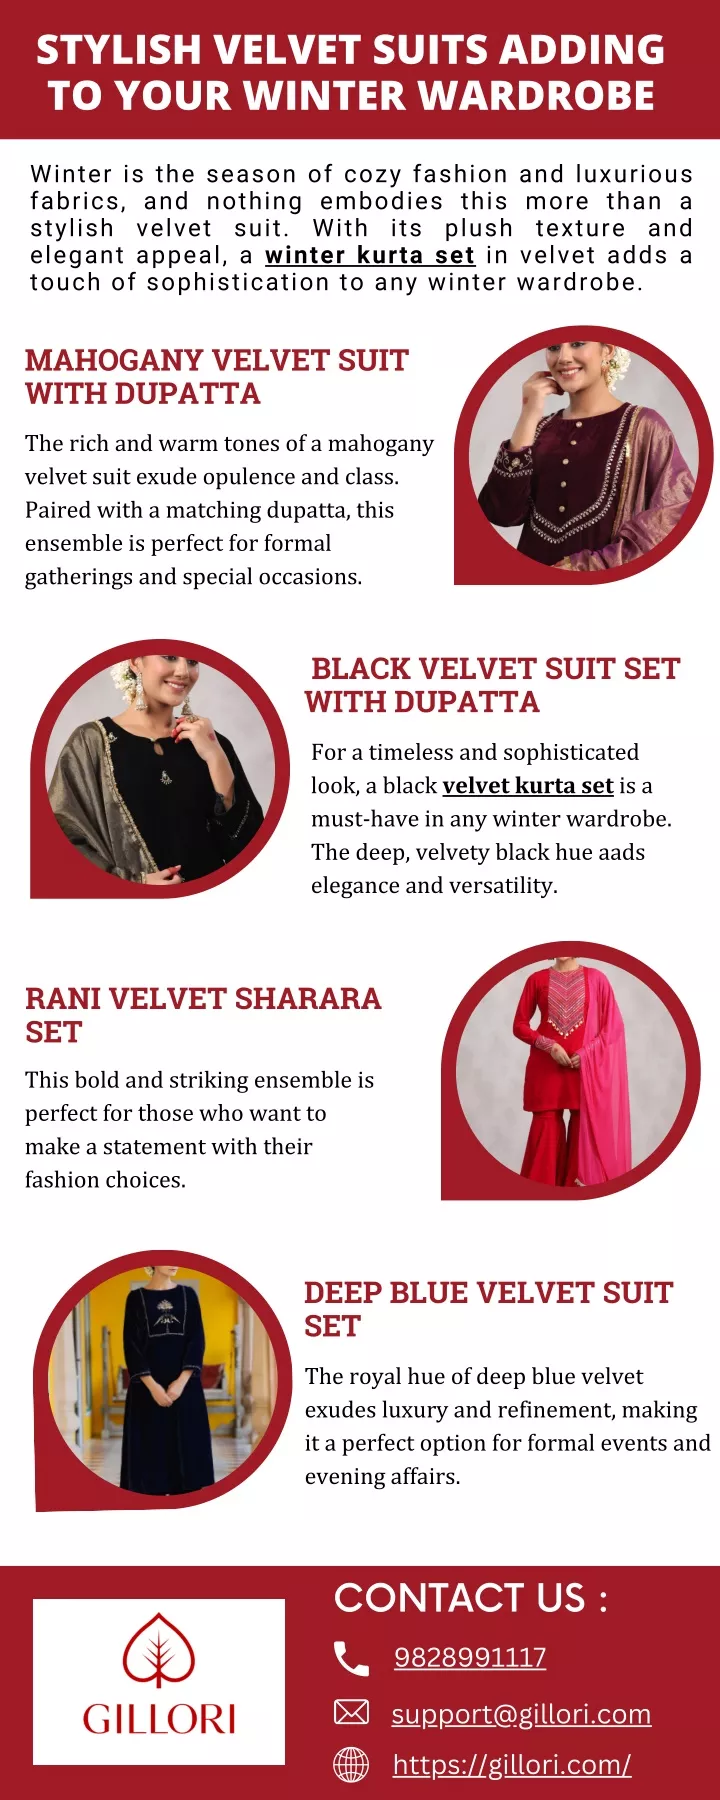 stylish velvet suits adding to your winter